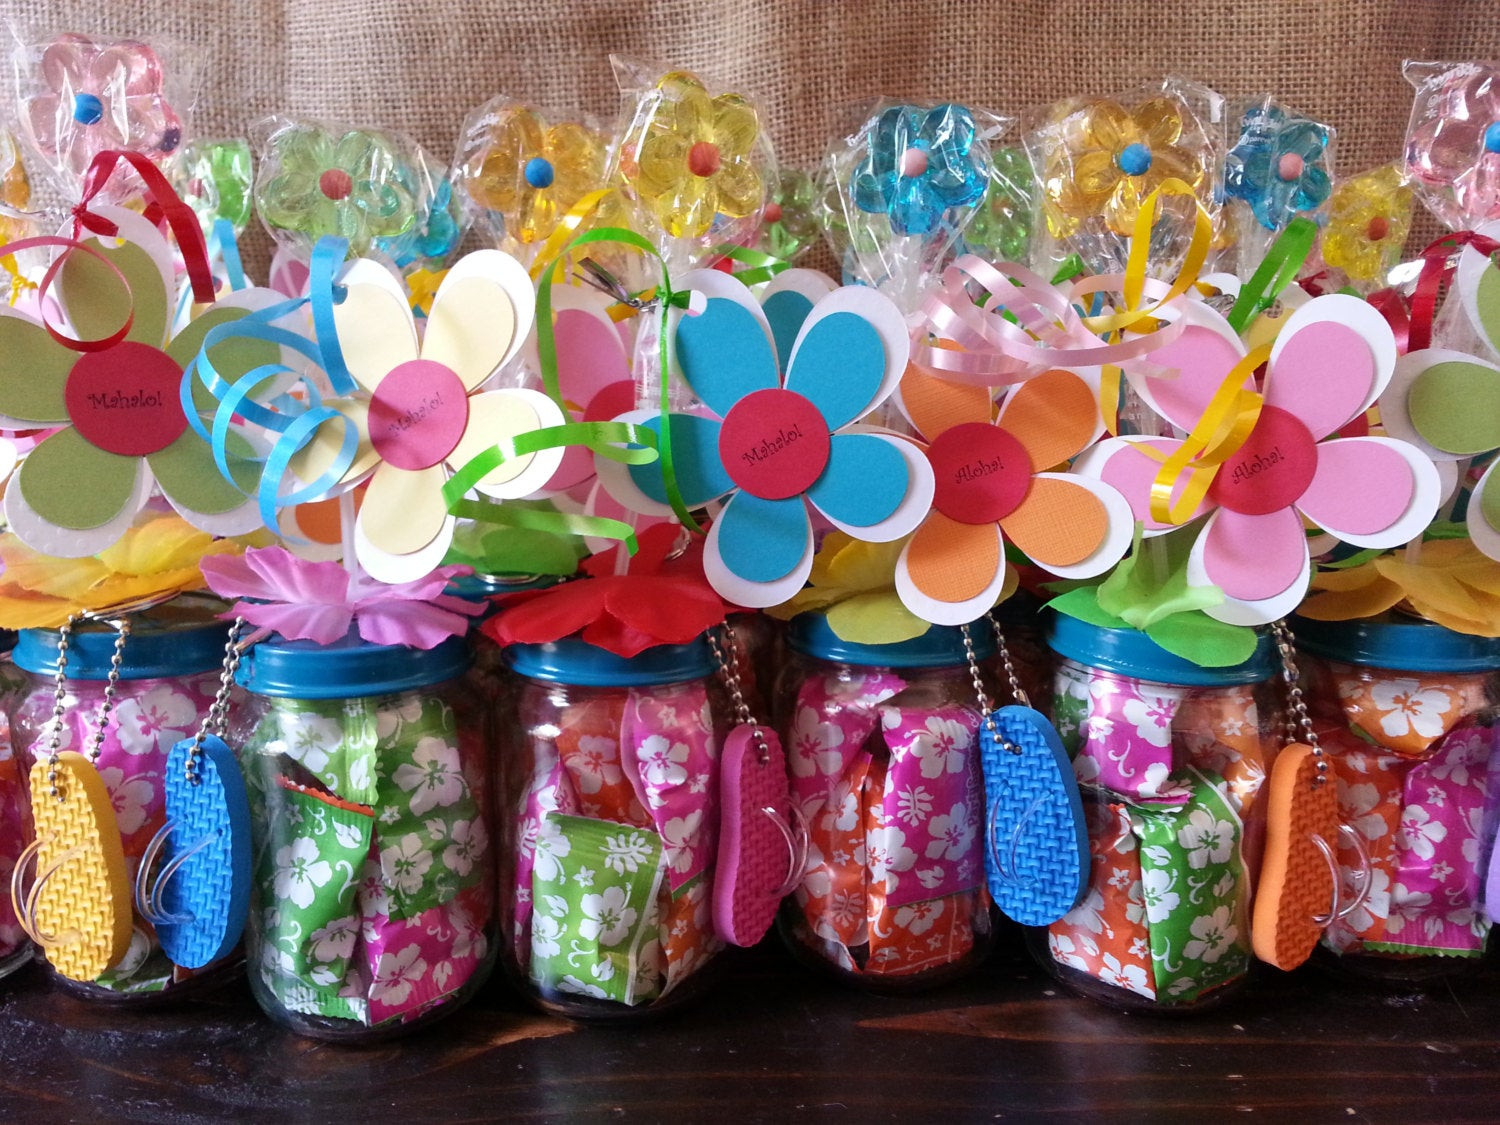 Party Favors Ideas For Kids
 Hawaiian Luau Party Favors Baby food jar party favors